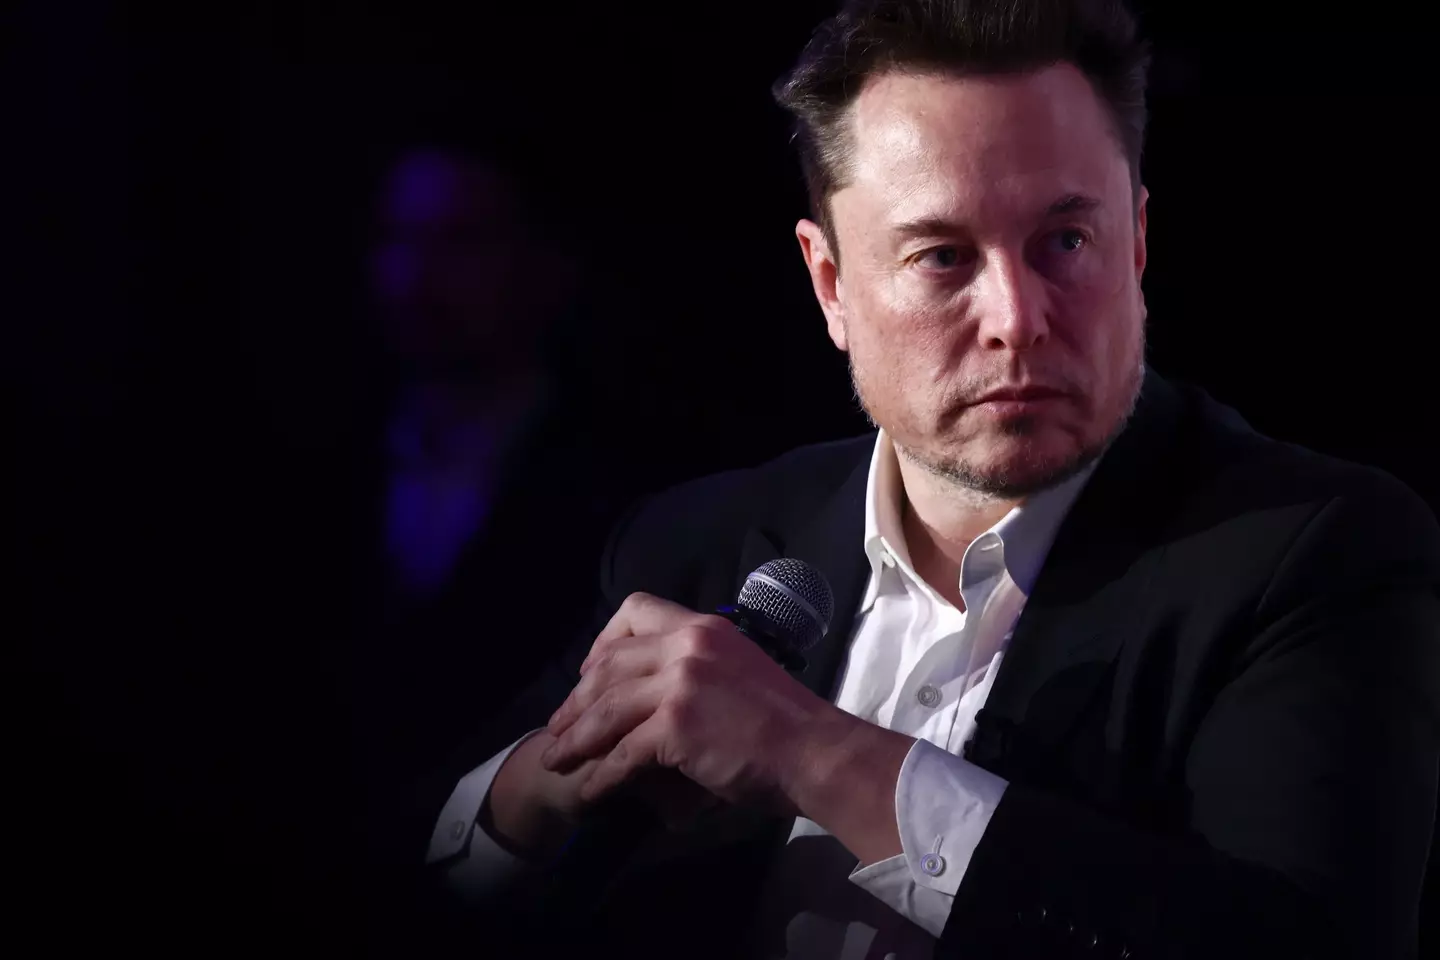 Elon Musk thinks AI is going to develop even quicker than we expect.